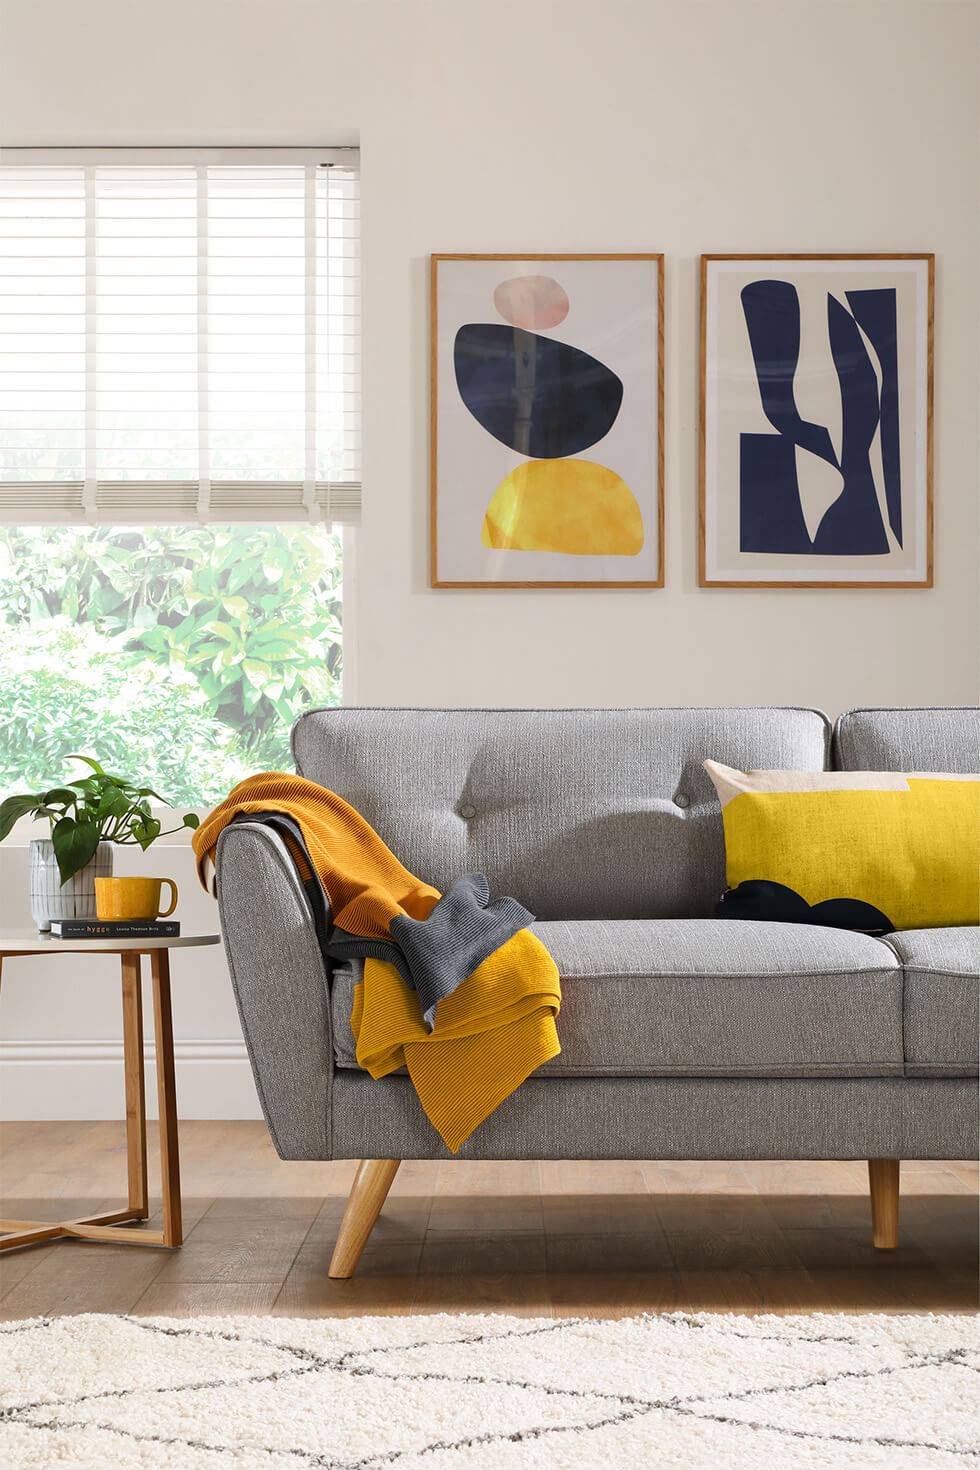 Monochrome living room with a grey sofa and yellow accessories